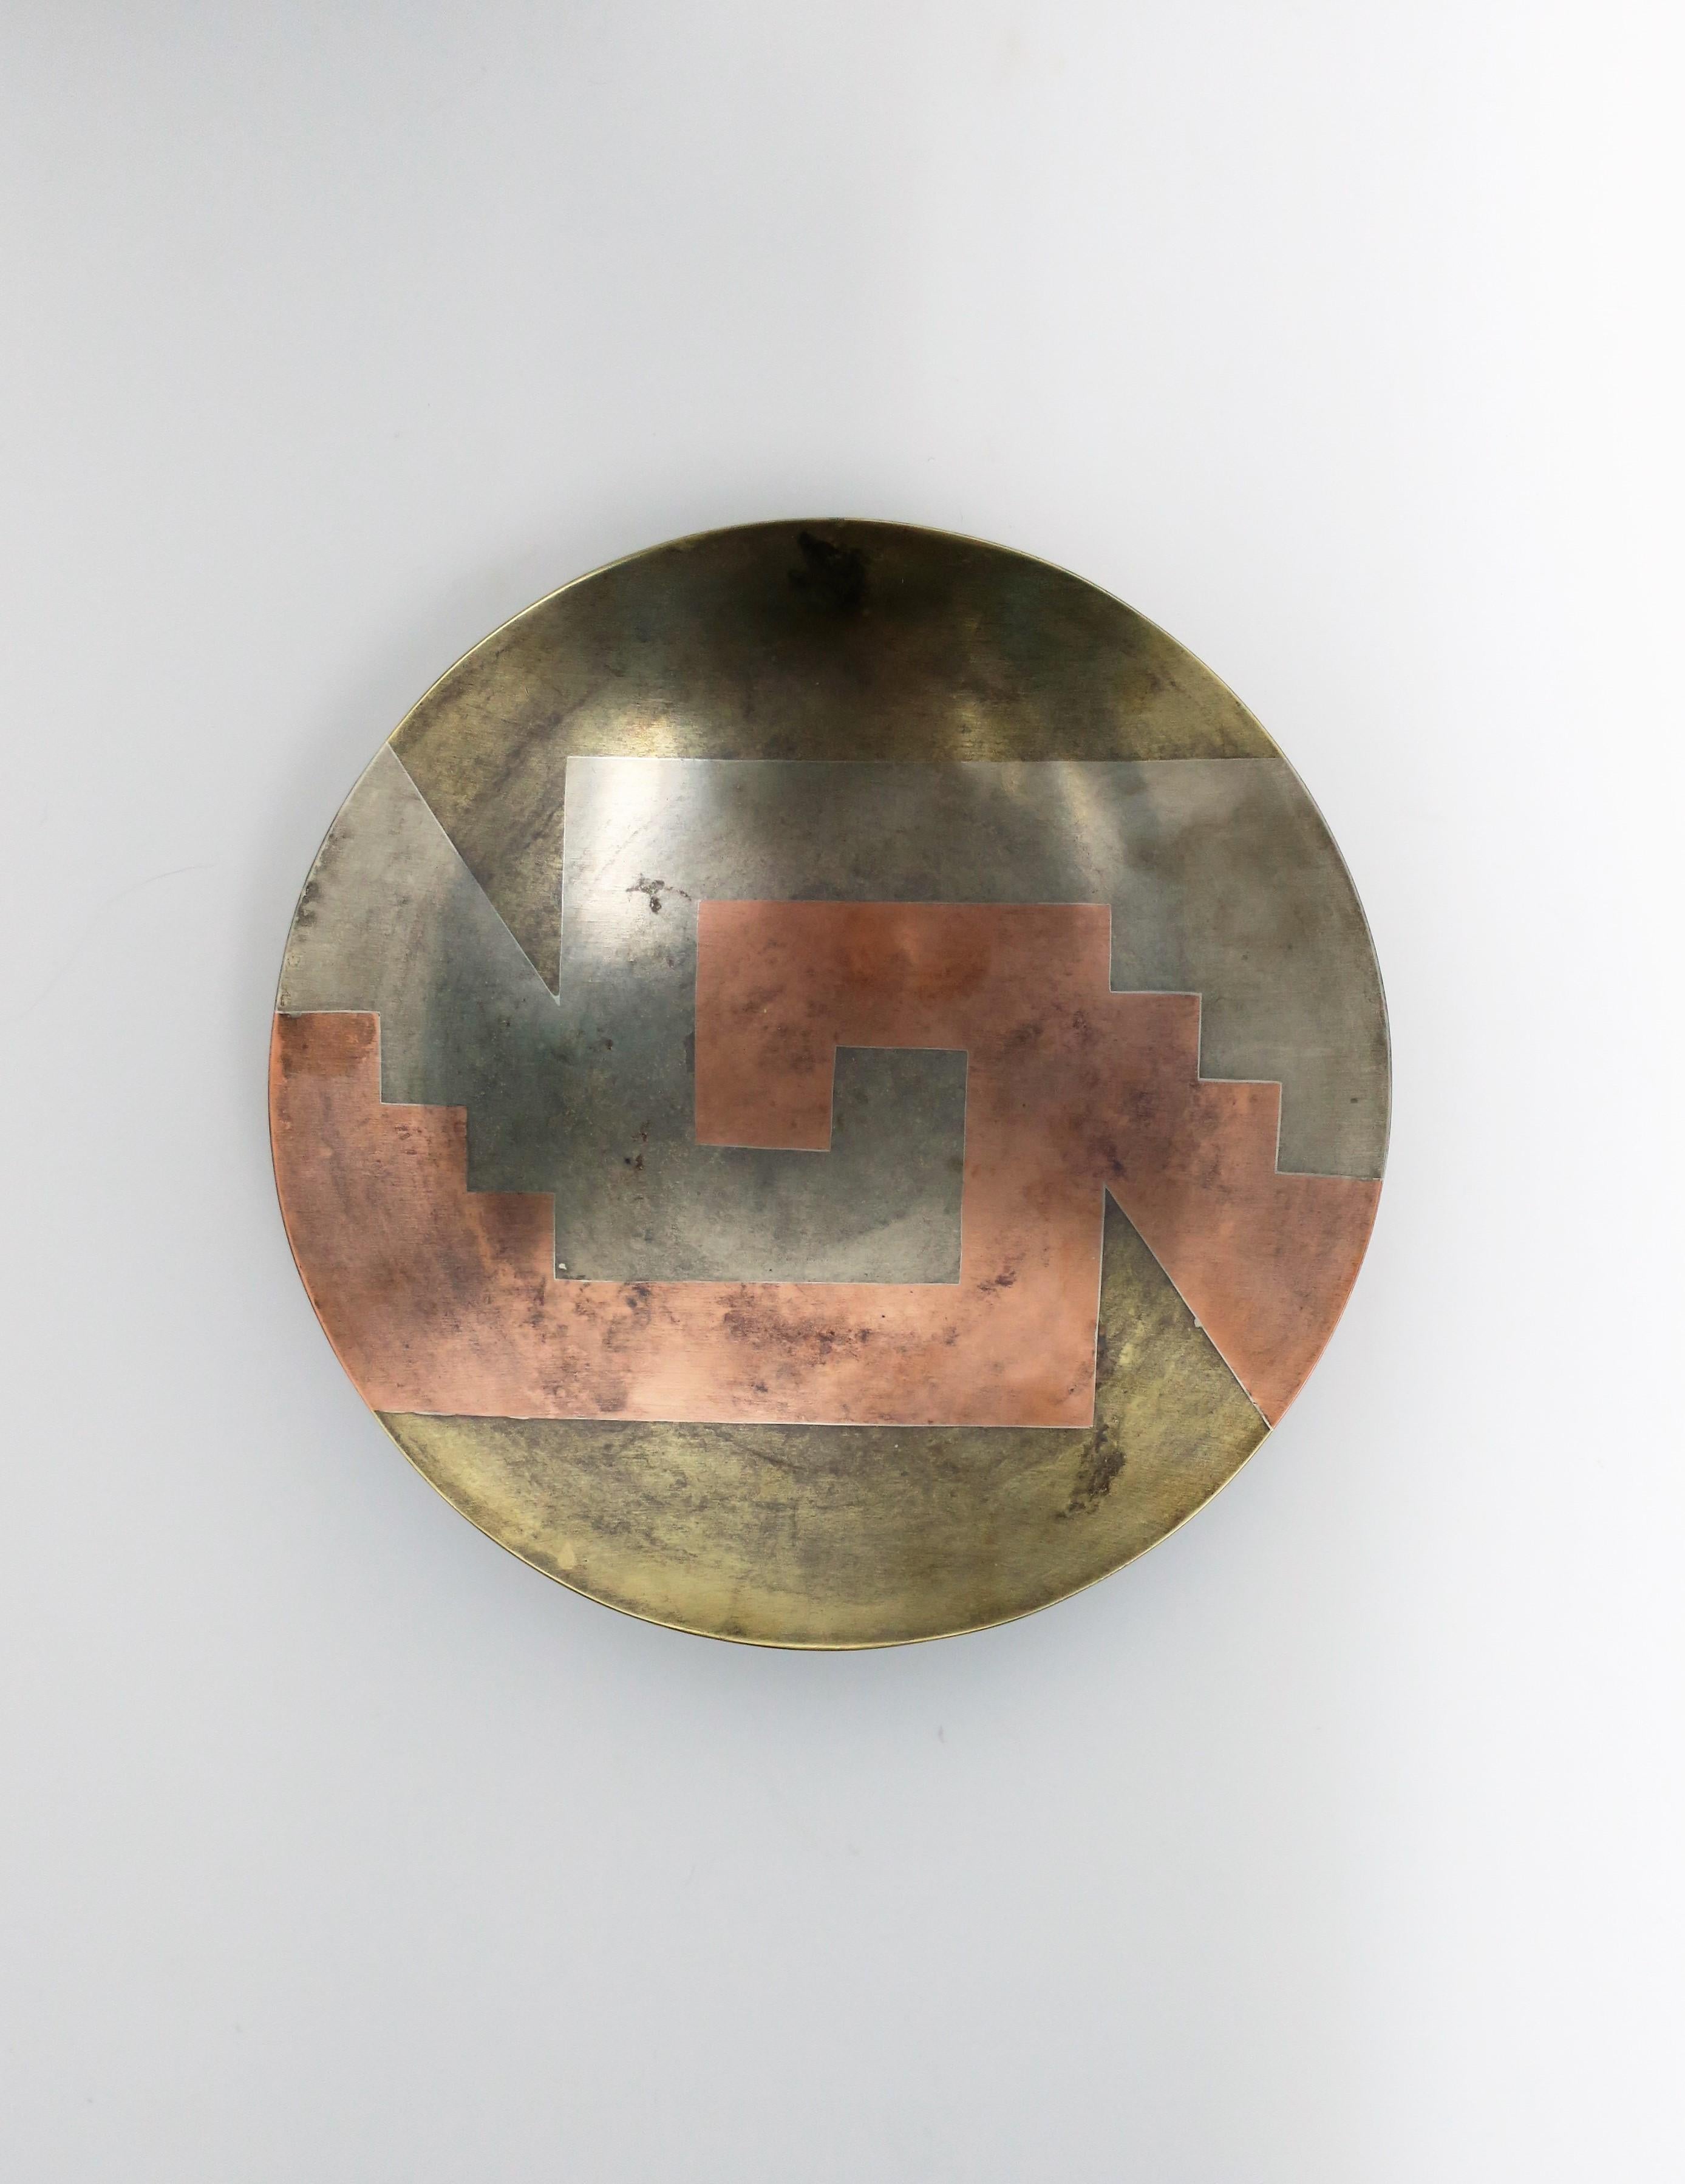 A beautiful Art Deco Modern style mixed metals bowl with geometric design by designer E. Cabello, circa 1960s, Mexico. Great as a standalone centerpiece or vide-poche/catchall as demonstrated. Mixed metals include: copper, brass, and silver alloy.